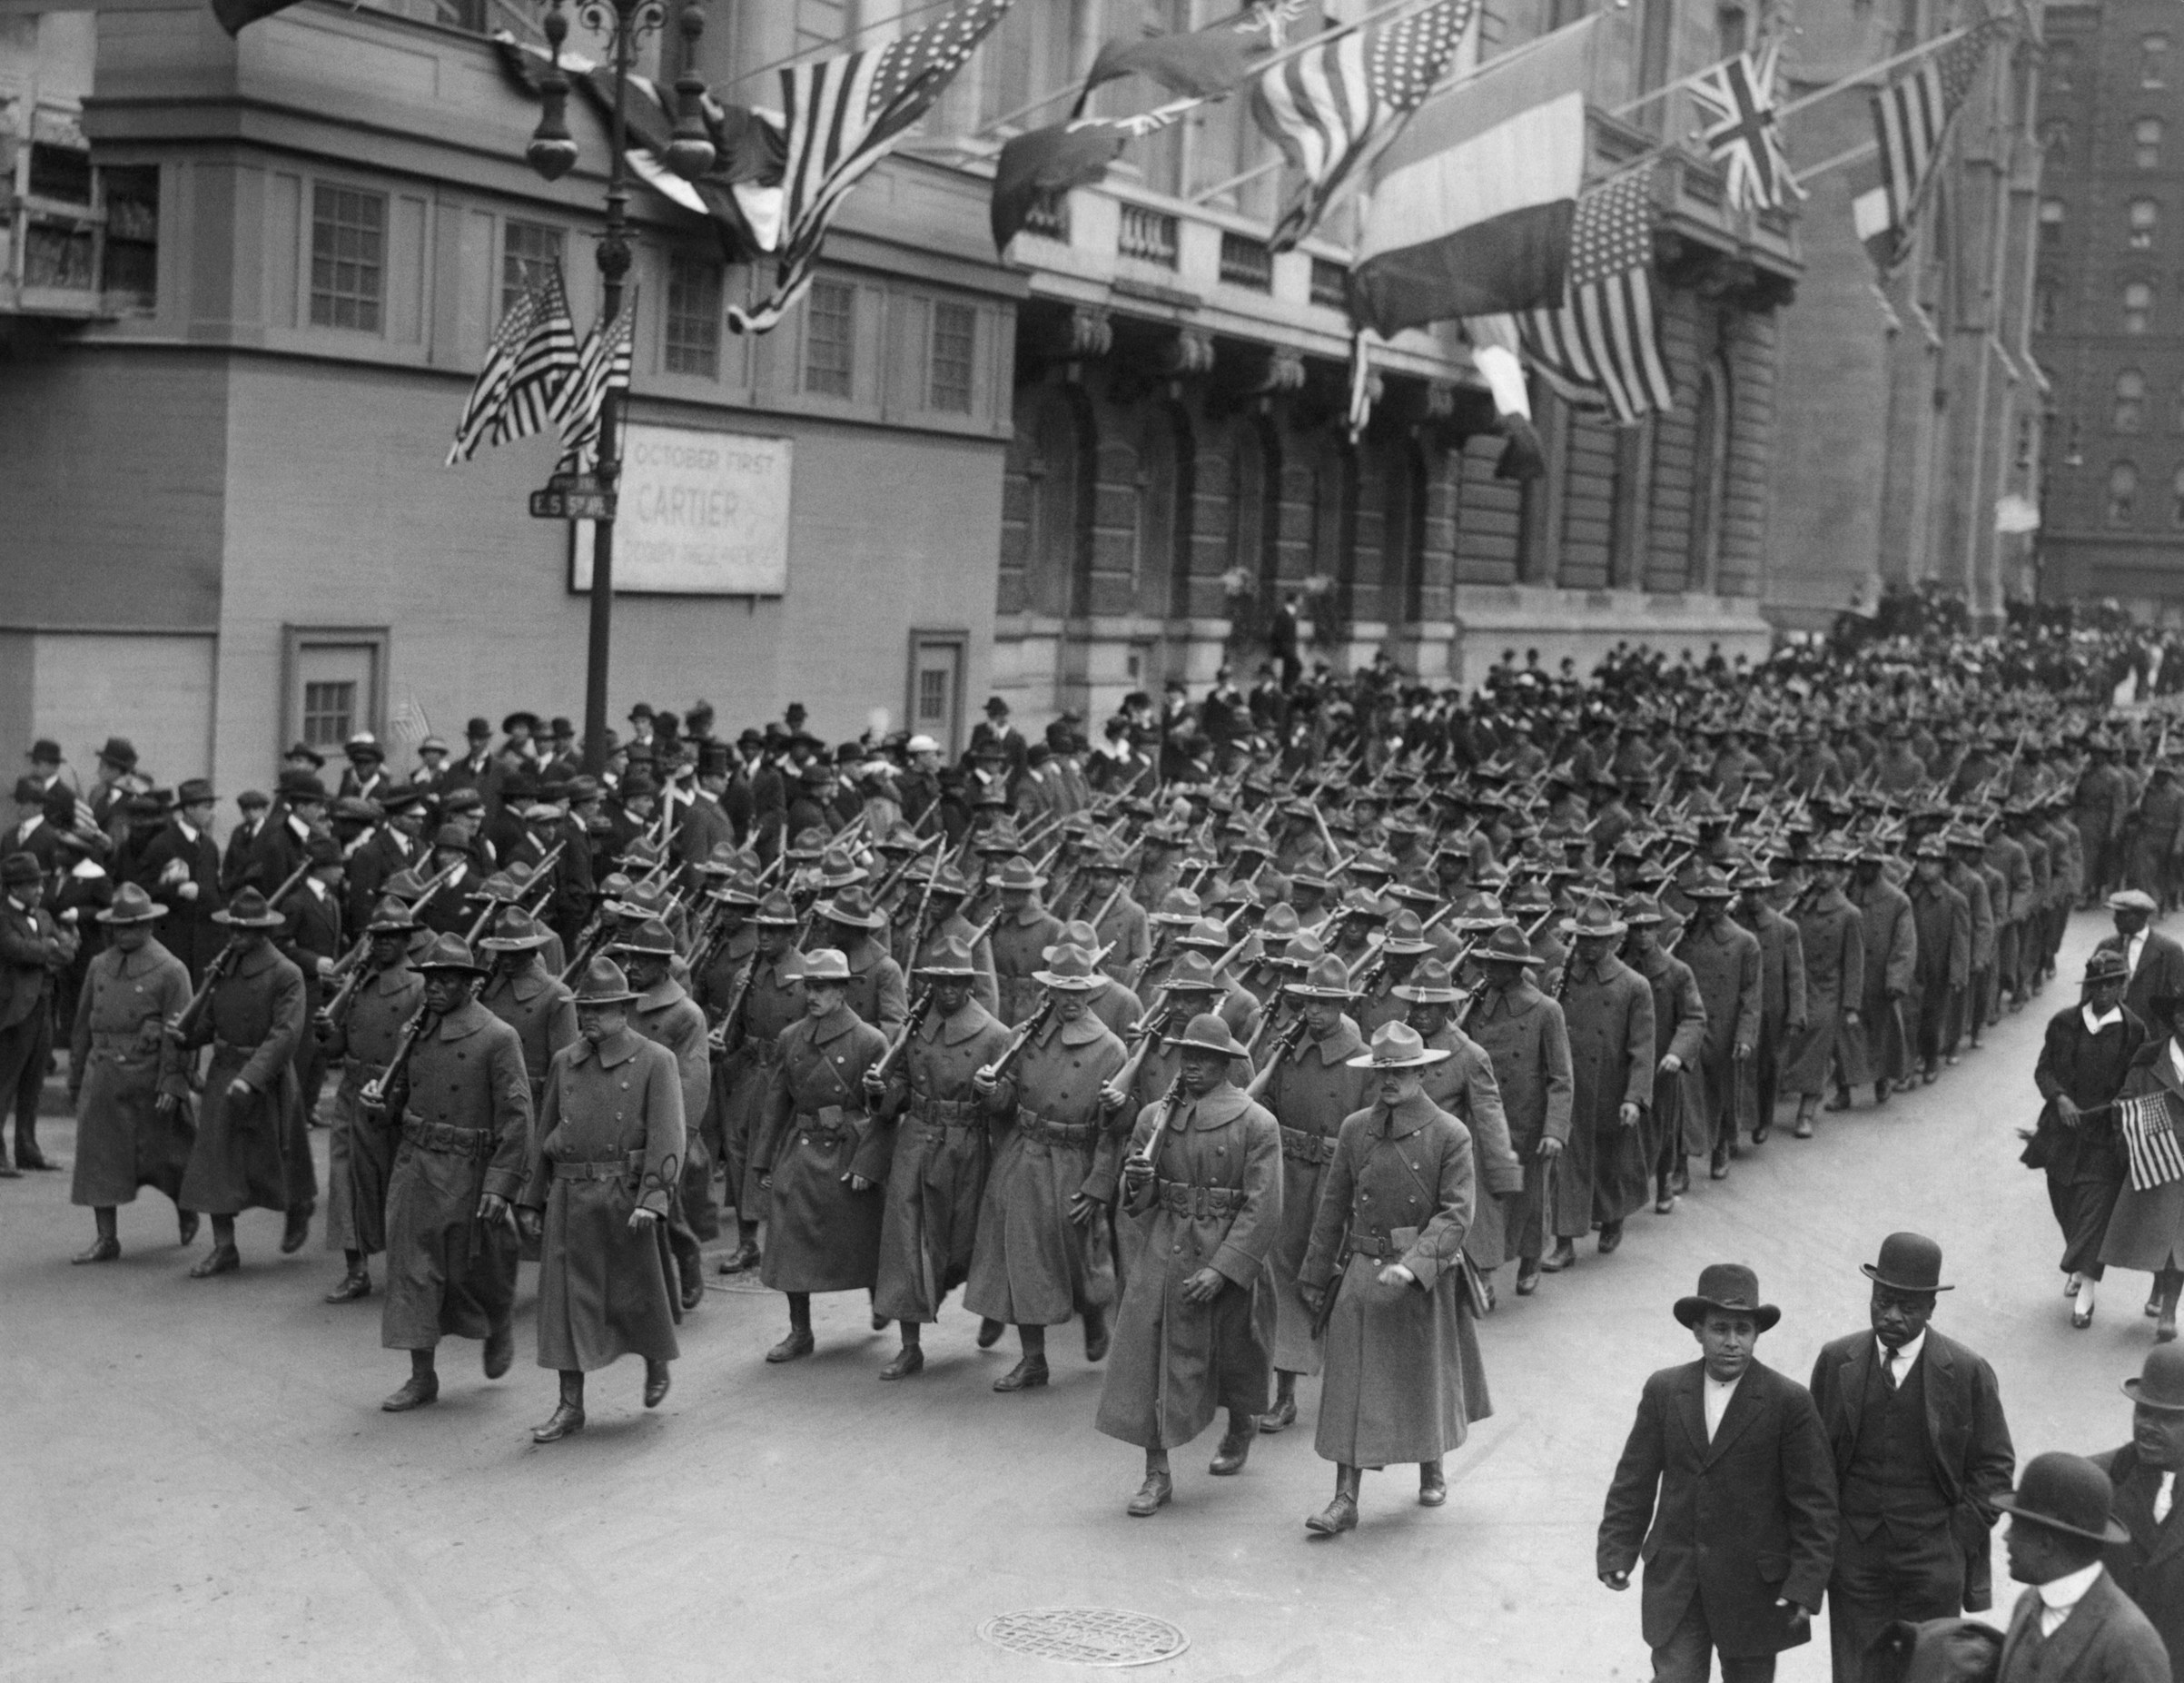 The all black 15th regiment parading up Fifth Avenue, New York City, en route to an Army camp in New York State in 1916. (Bettmann/Getty Images)